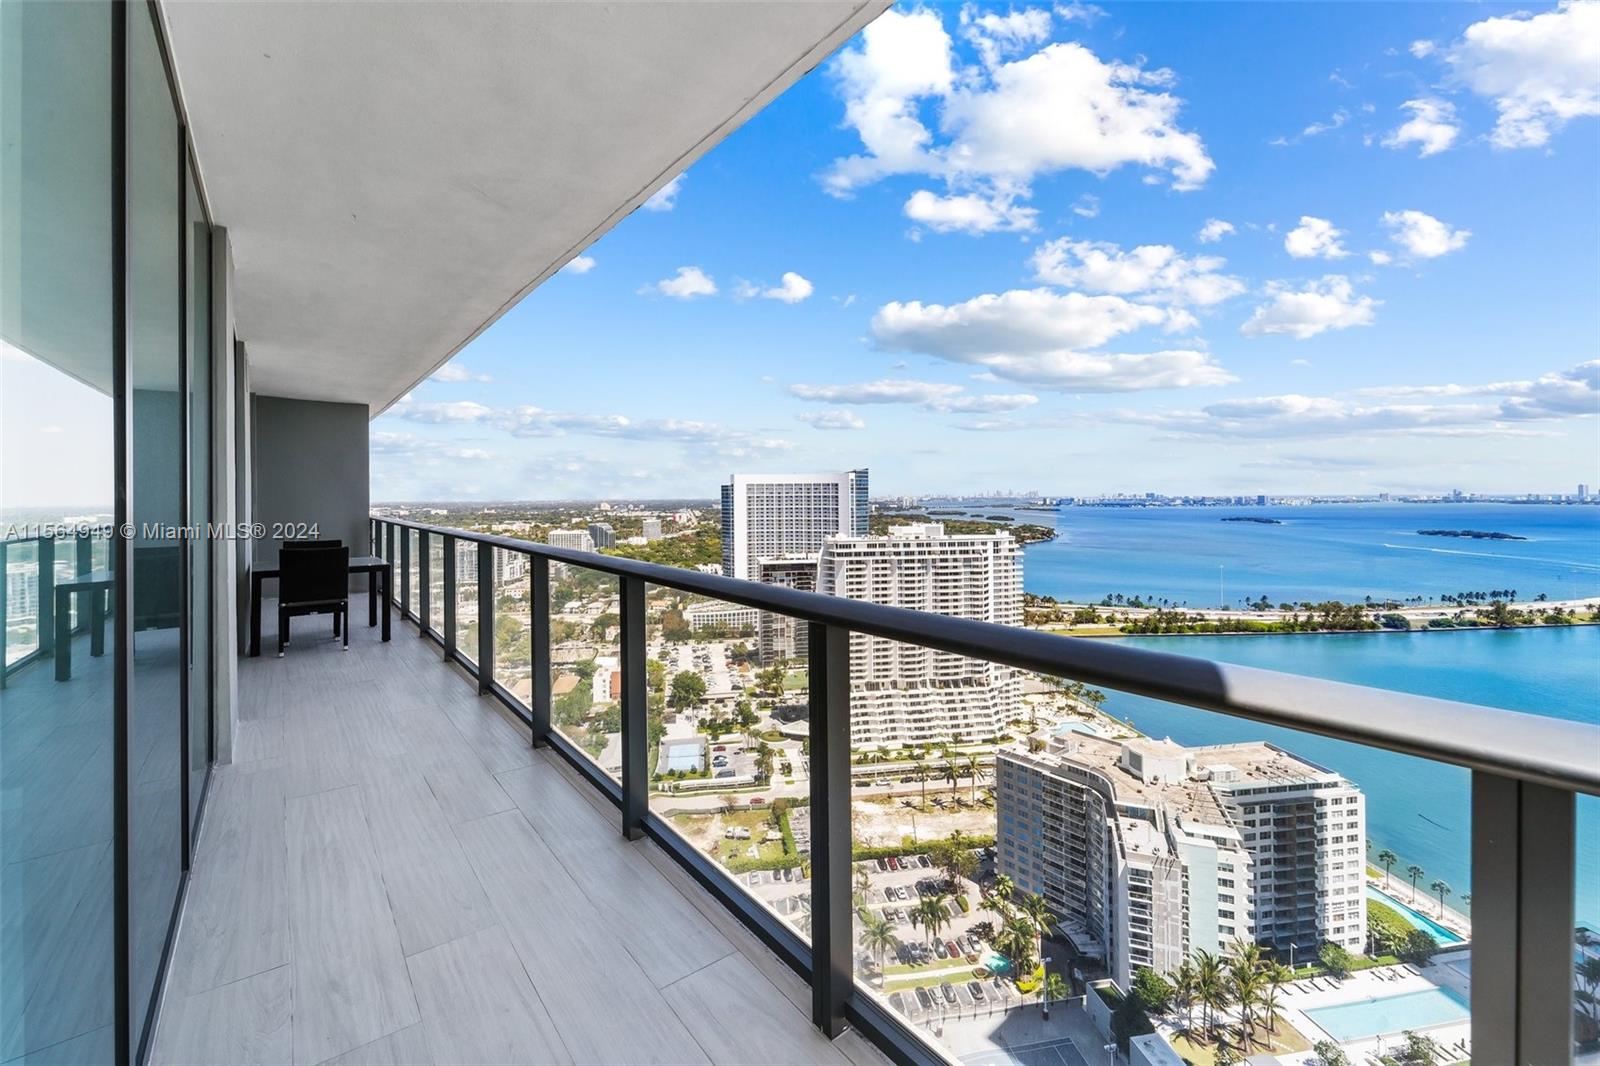 Welcome to your slice of Miami paradise! This chic condo, completed in 2018, epitomizes modern luxury living. Open concept with amazing views from anywhere in the unit. Fully turnkey, it offers an effortless transition into your dream lifestyle. Incredible wrap around balcony with unparalleled views of Biscayne Bay, a constant reminder of Miami's coastal charm. Conveniently located in between Brickell and Midtown/Wynwood. Whether you're craving a gourmet meal, seeking the latest fashion trends, or want to unwind with a walk along the vibrant streets, everything you desire is within easy reach. New beach wood plank porcelain tile and automatic window shades(2022). World class amenities include gym, clubroom and multiple pools. Don't miss your chance to call this incredible condo your home!